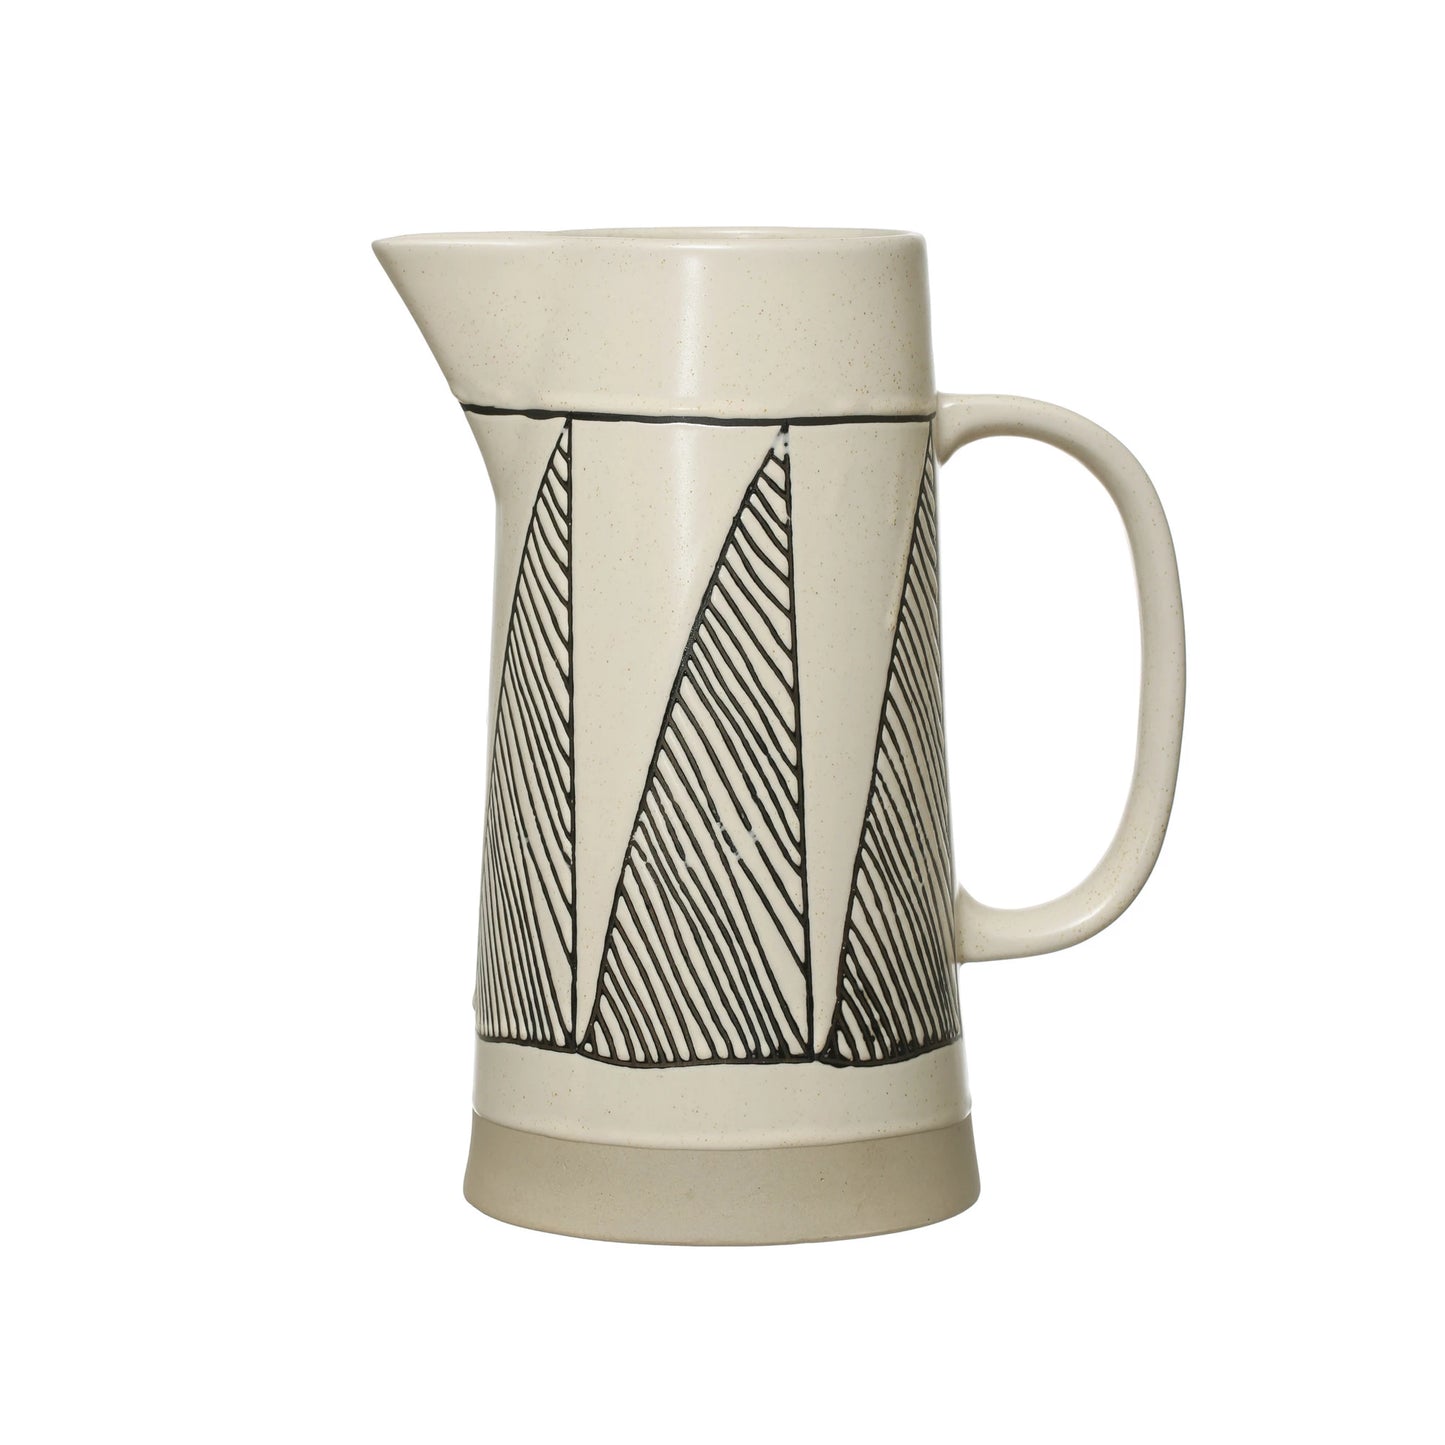 Embossed Stoneware Pitcher, The Feathered Farmhouse